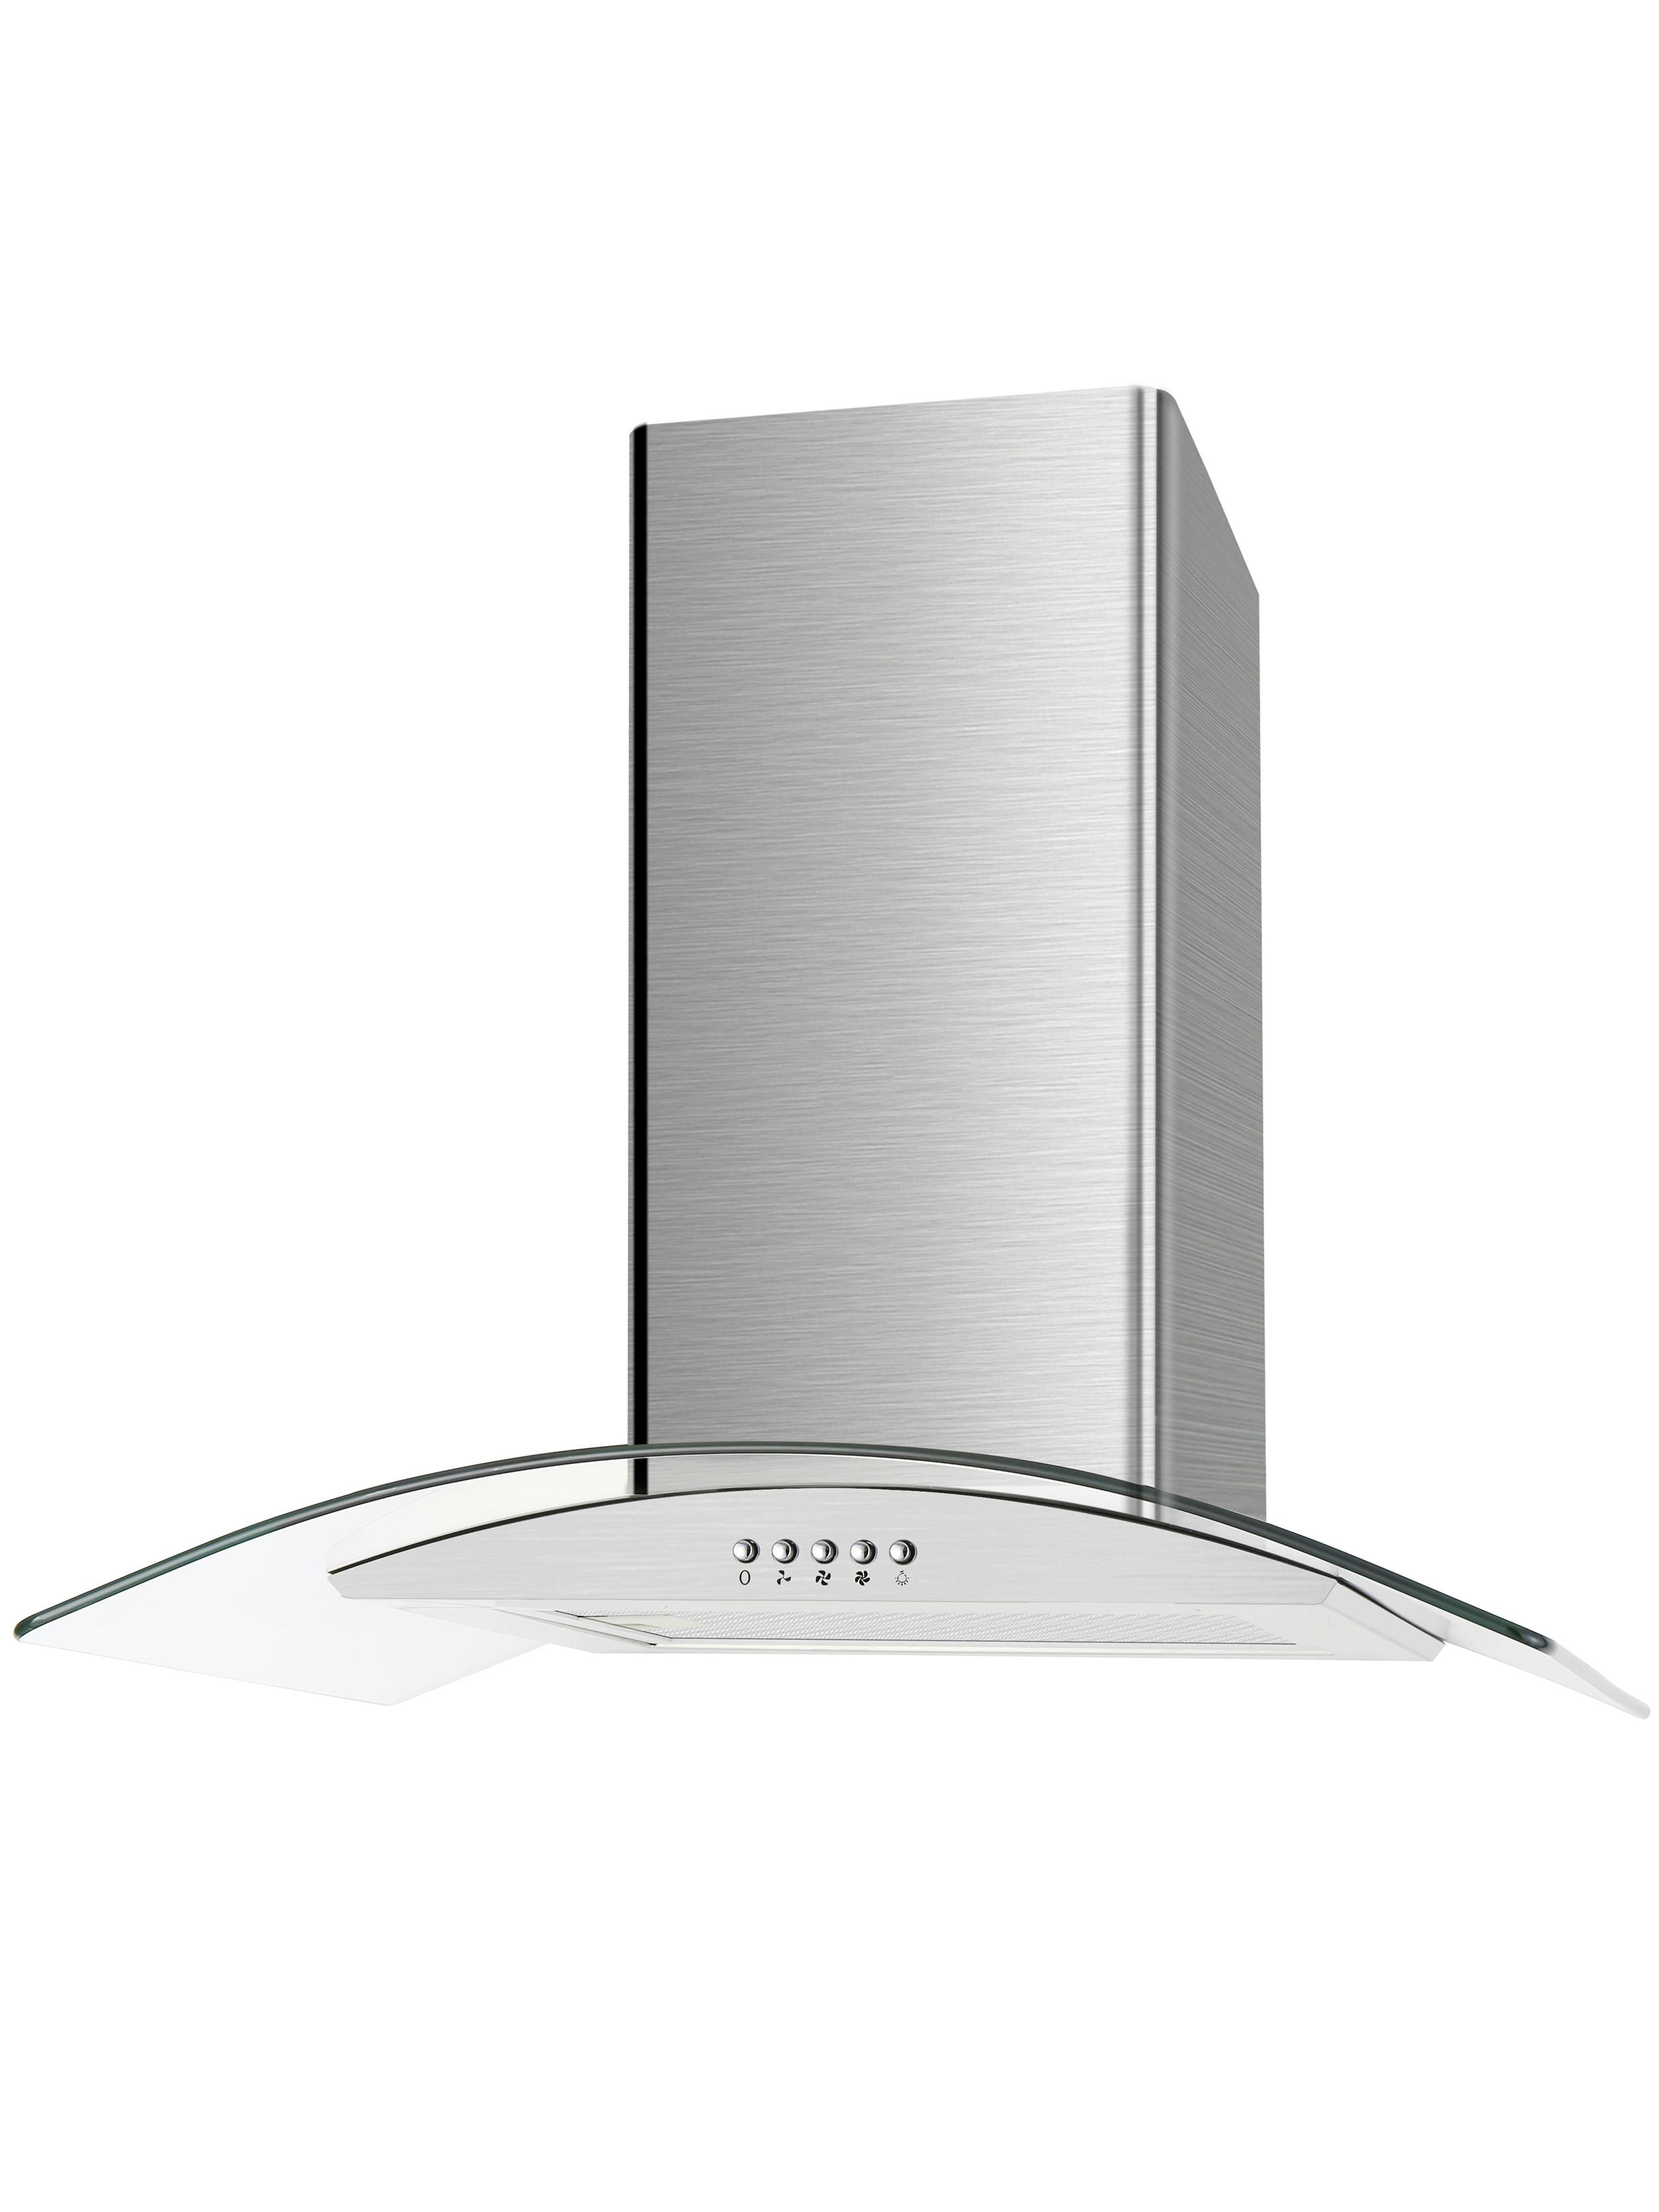 Econolux ART28418 70cm Curved Glass Cooker Hood